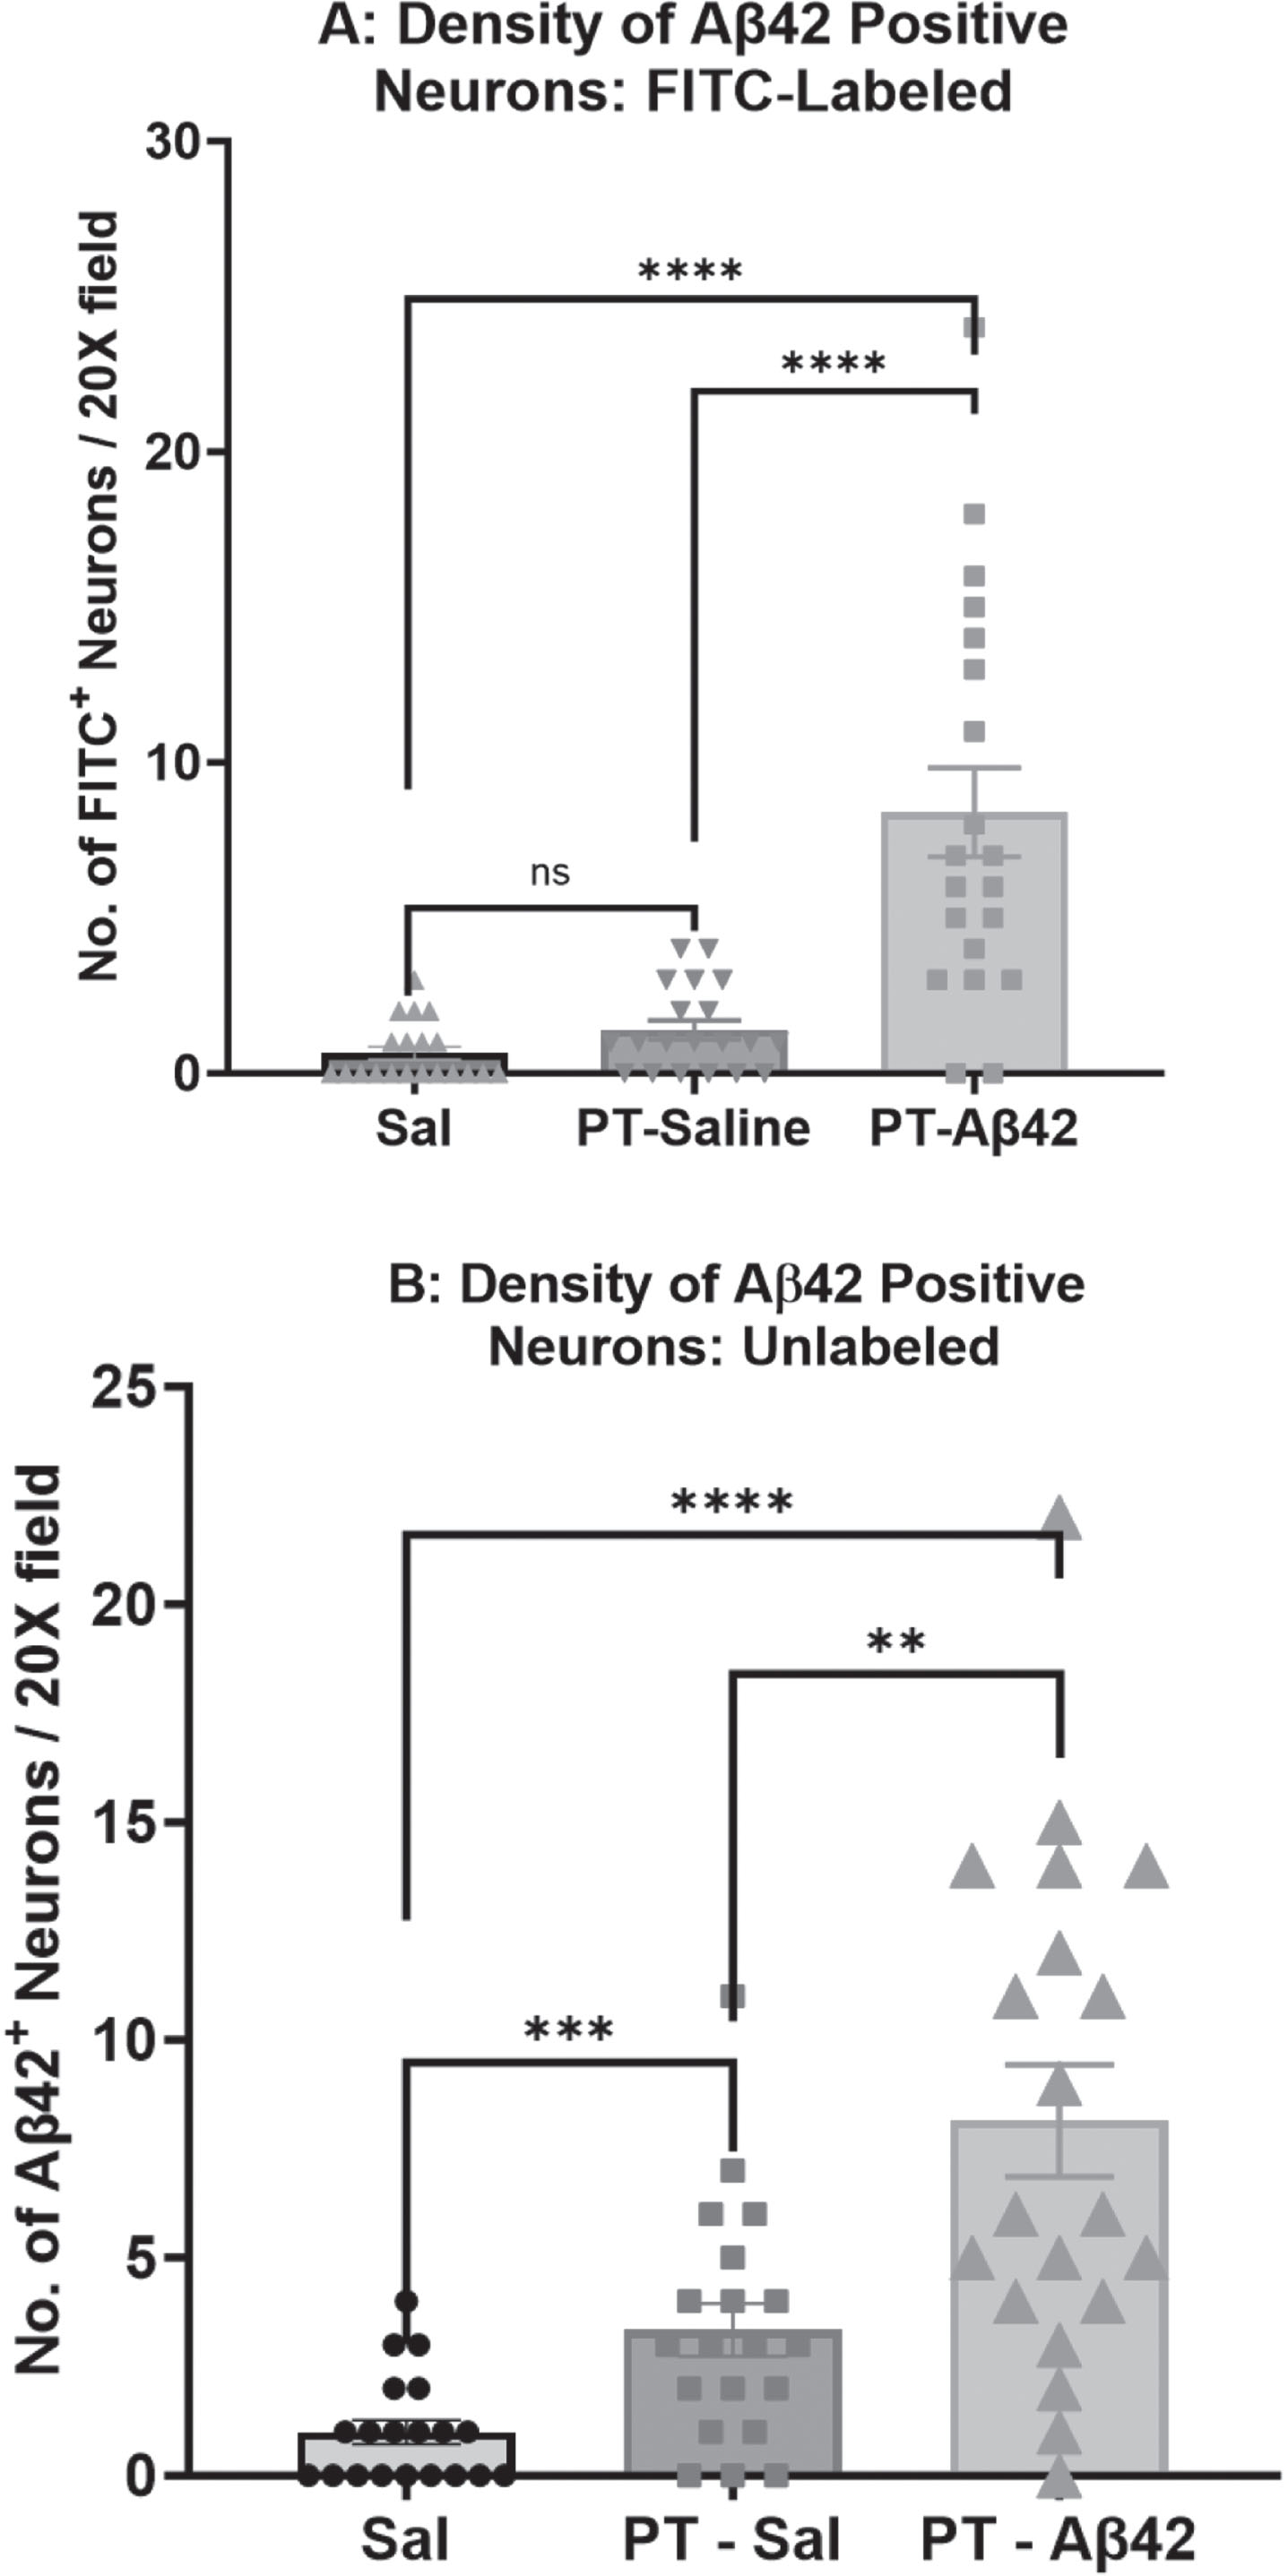 The density of A
β42 positive neurons in the cerebral cortex was highest in PT-A
β42 mice. A) A comparison of the density of Aβ42-positive neurons in mice injected with FITC-Aβ42 peptide was carried out by immunofluorescent microscopy. A difference in the density of Aβ42-positive neurons in the cerebral cortex was detected across the three treatment groups. Comparison of the density of Aβ42-positive neurons reached statistical significance (Mann-Whitney tests, p < 0.0001) between the Sal-only and PT-FITC-Aβ42 groups. The difference in the density of Aβ42-positive neurons also reached statistical significance (Mann-Whitney tests, p < 0.0001) between the PT-Sal and PT-FITC-Aβ42 groups. B) Comparison of the density of Aβ42-positive neurons reached statistical significance (Mann-Whitney tests, p < 0.0001) between the Sal-only and PT-Aβ42 groups. Similarly, group comparisons between Sal and PT-Sal, and PT-Sal and PT-Aβ42 groups also attained statistical significance (Mann-Whitney tests, p < 0.001 and p < 0.01, respectively). Error bars are standard error of the mean (SEM).